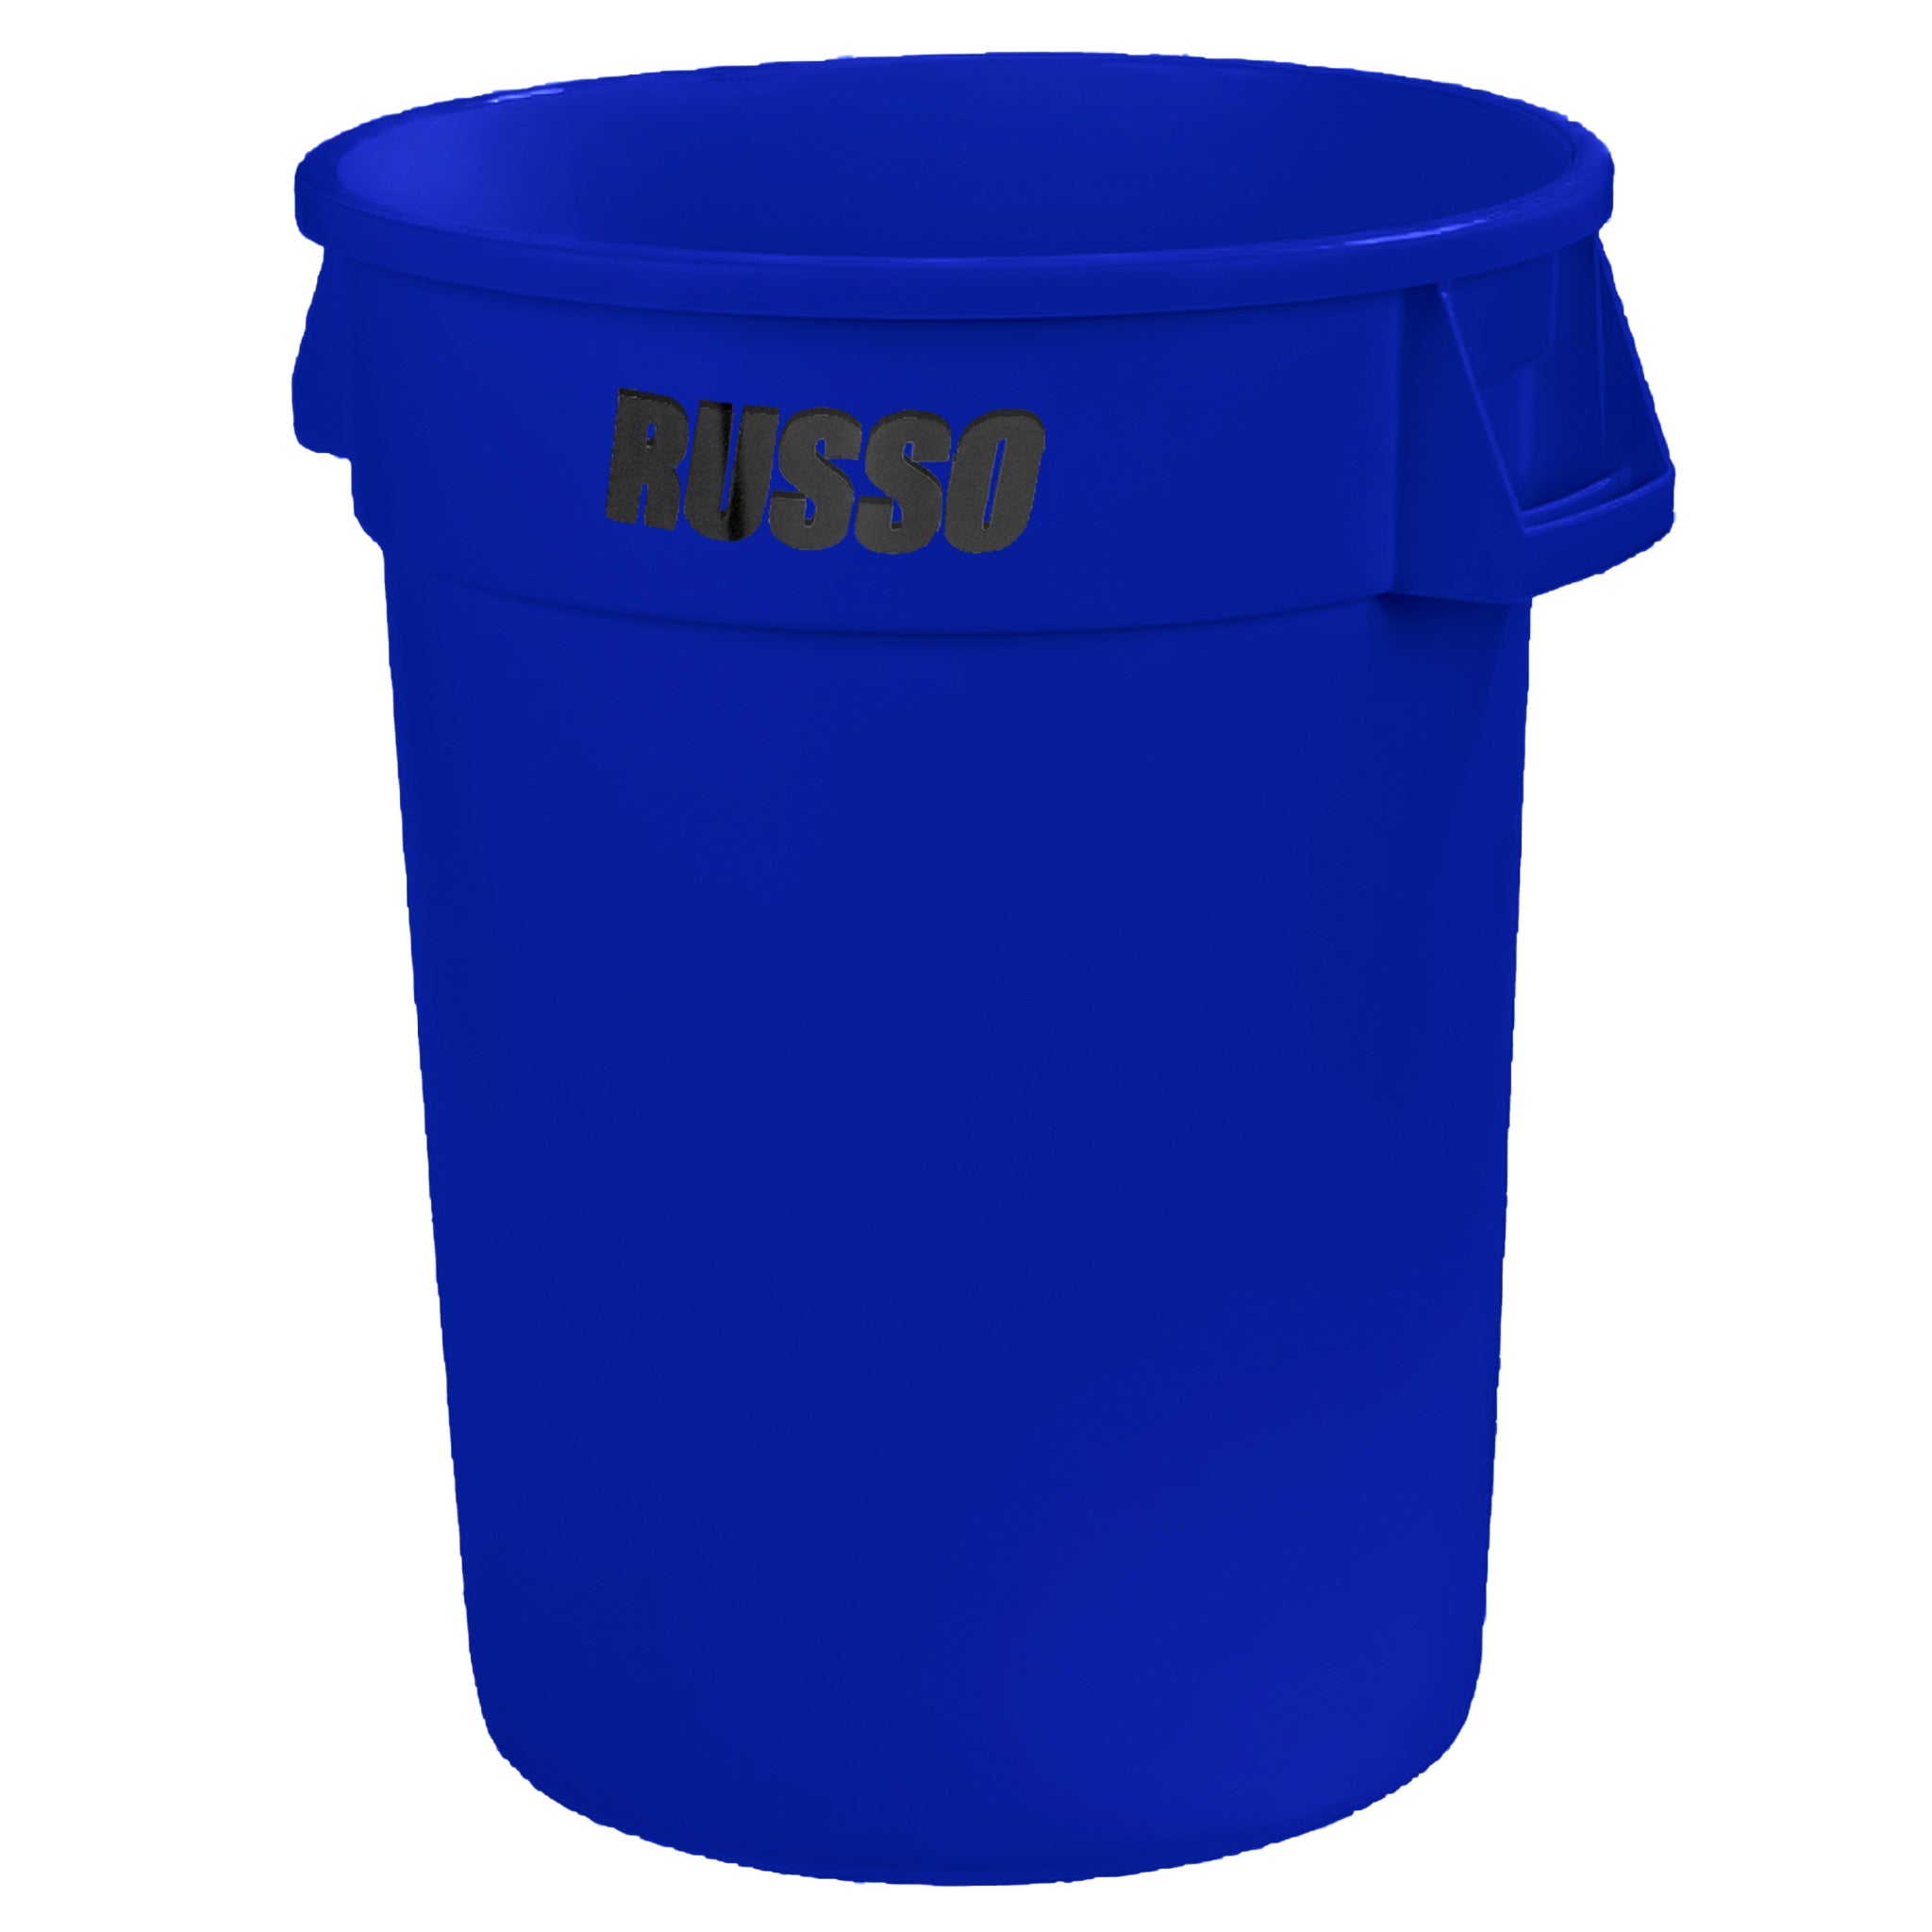 RUSSO 2642 Blue Glow Can 32 Gallon